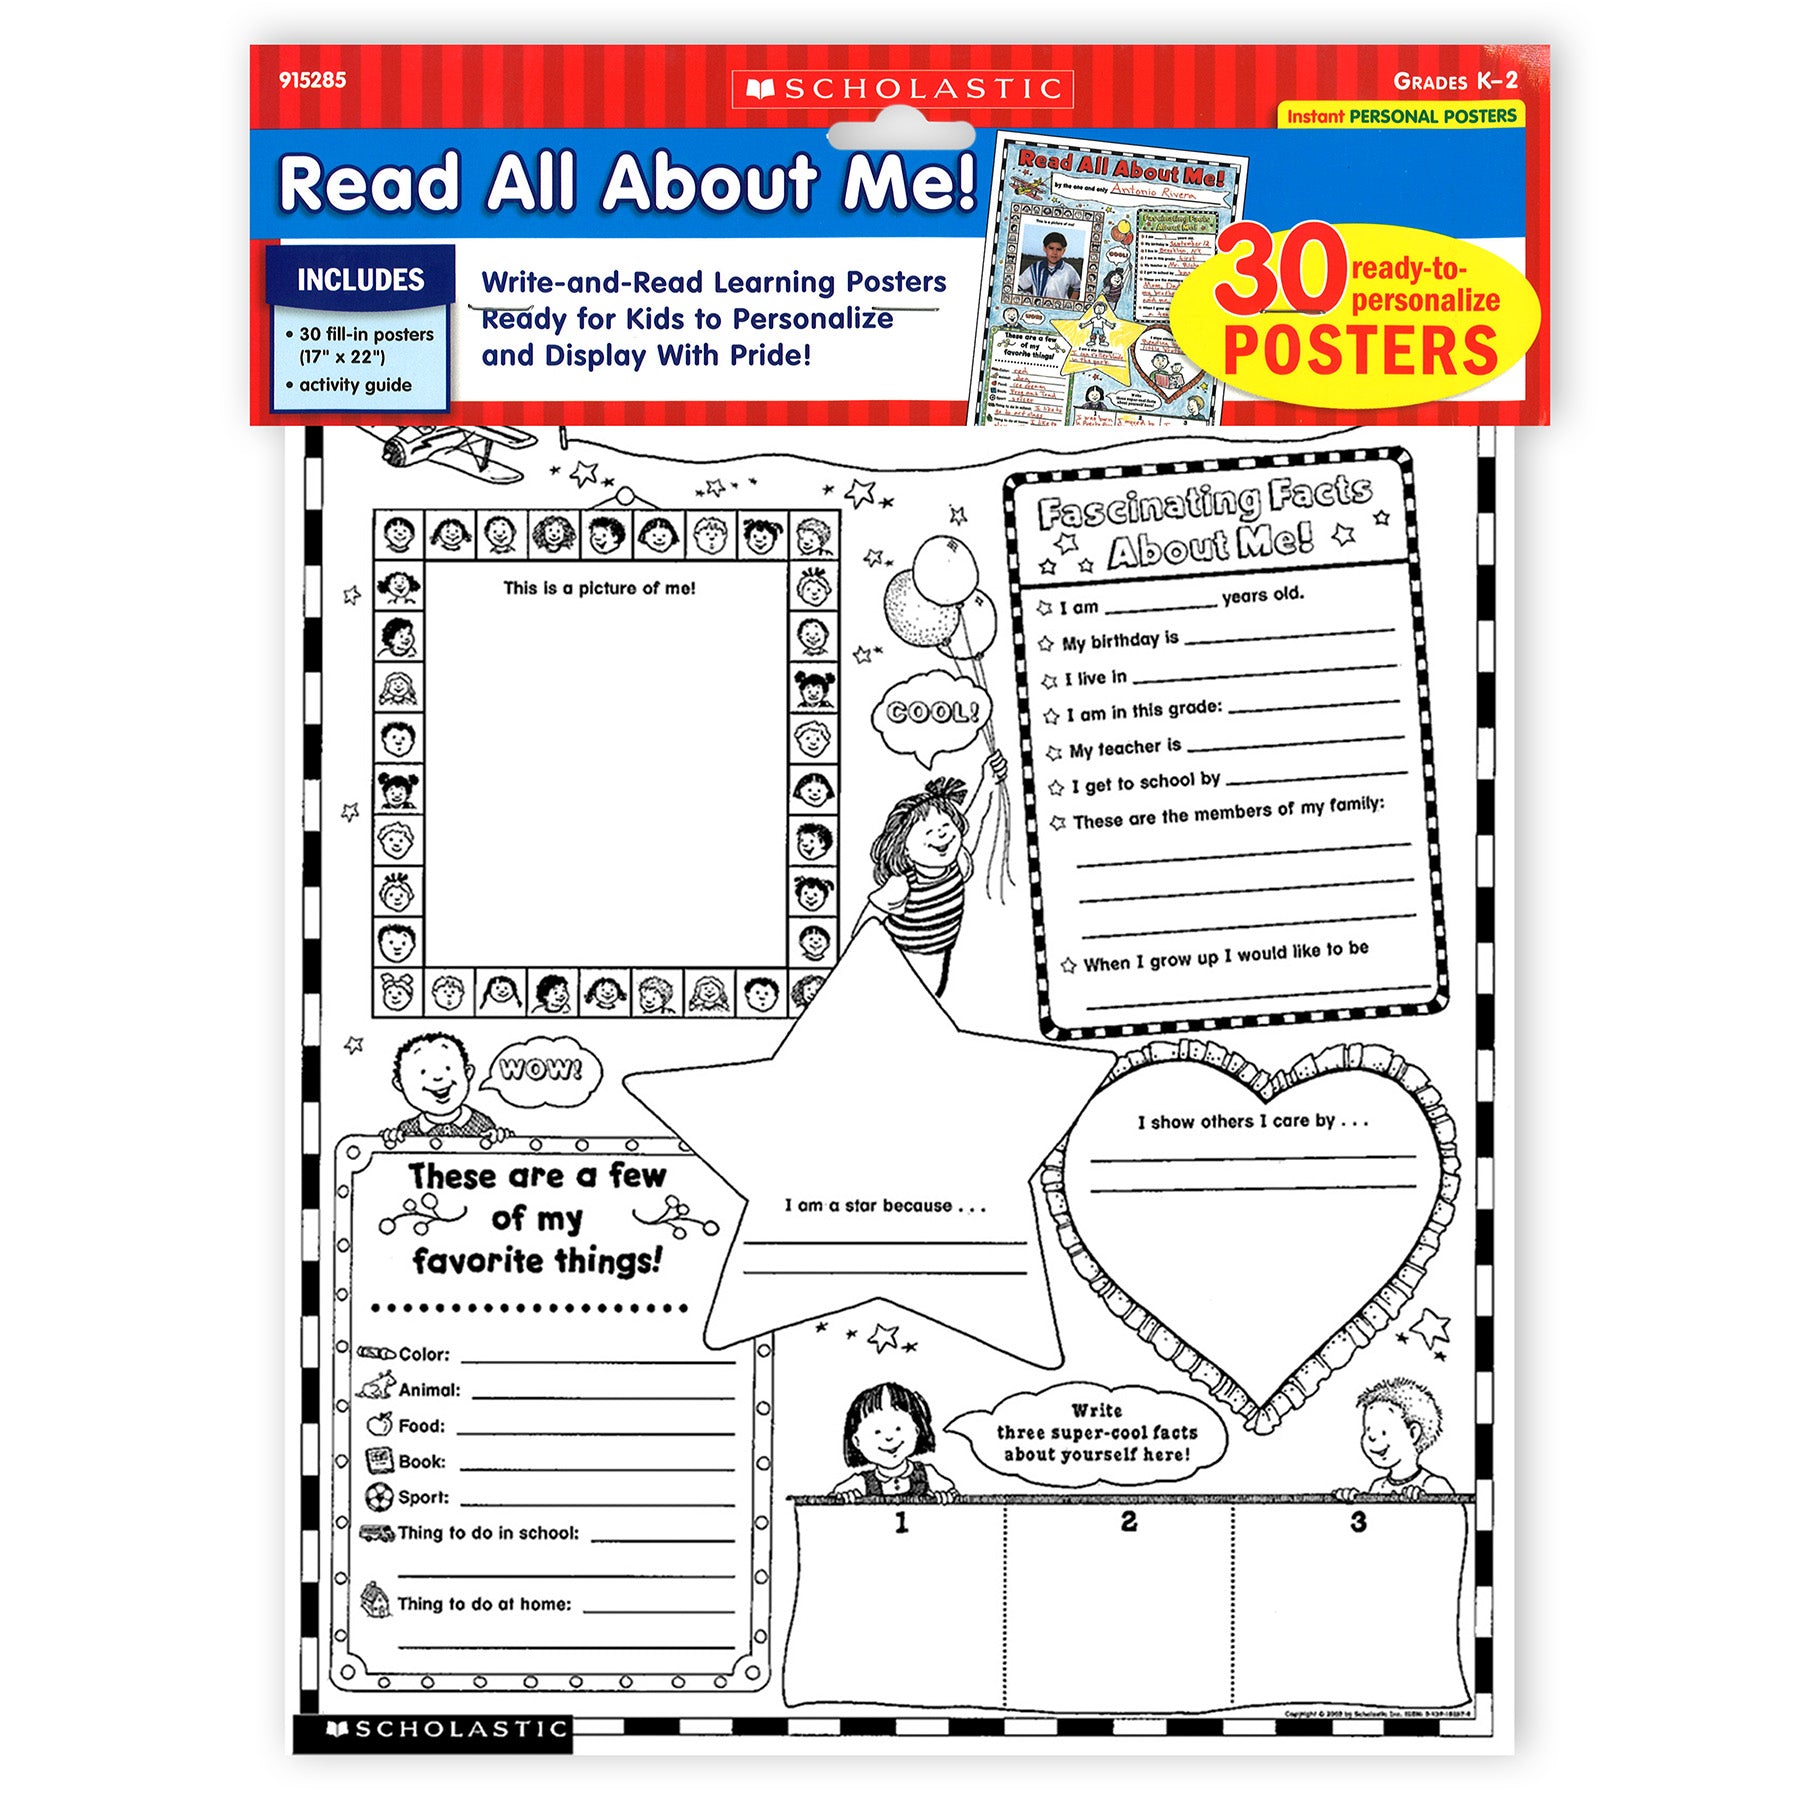 Instant Personal Poster Sets: Read All About Me, Set of 30